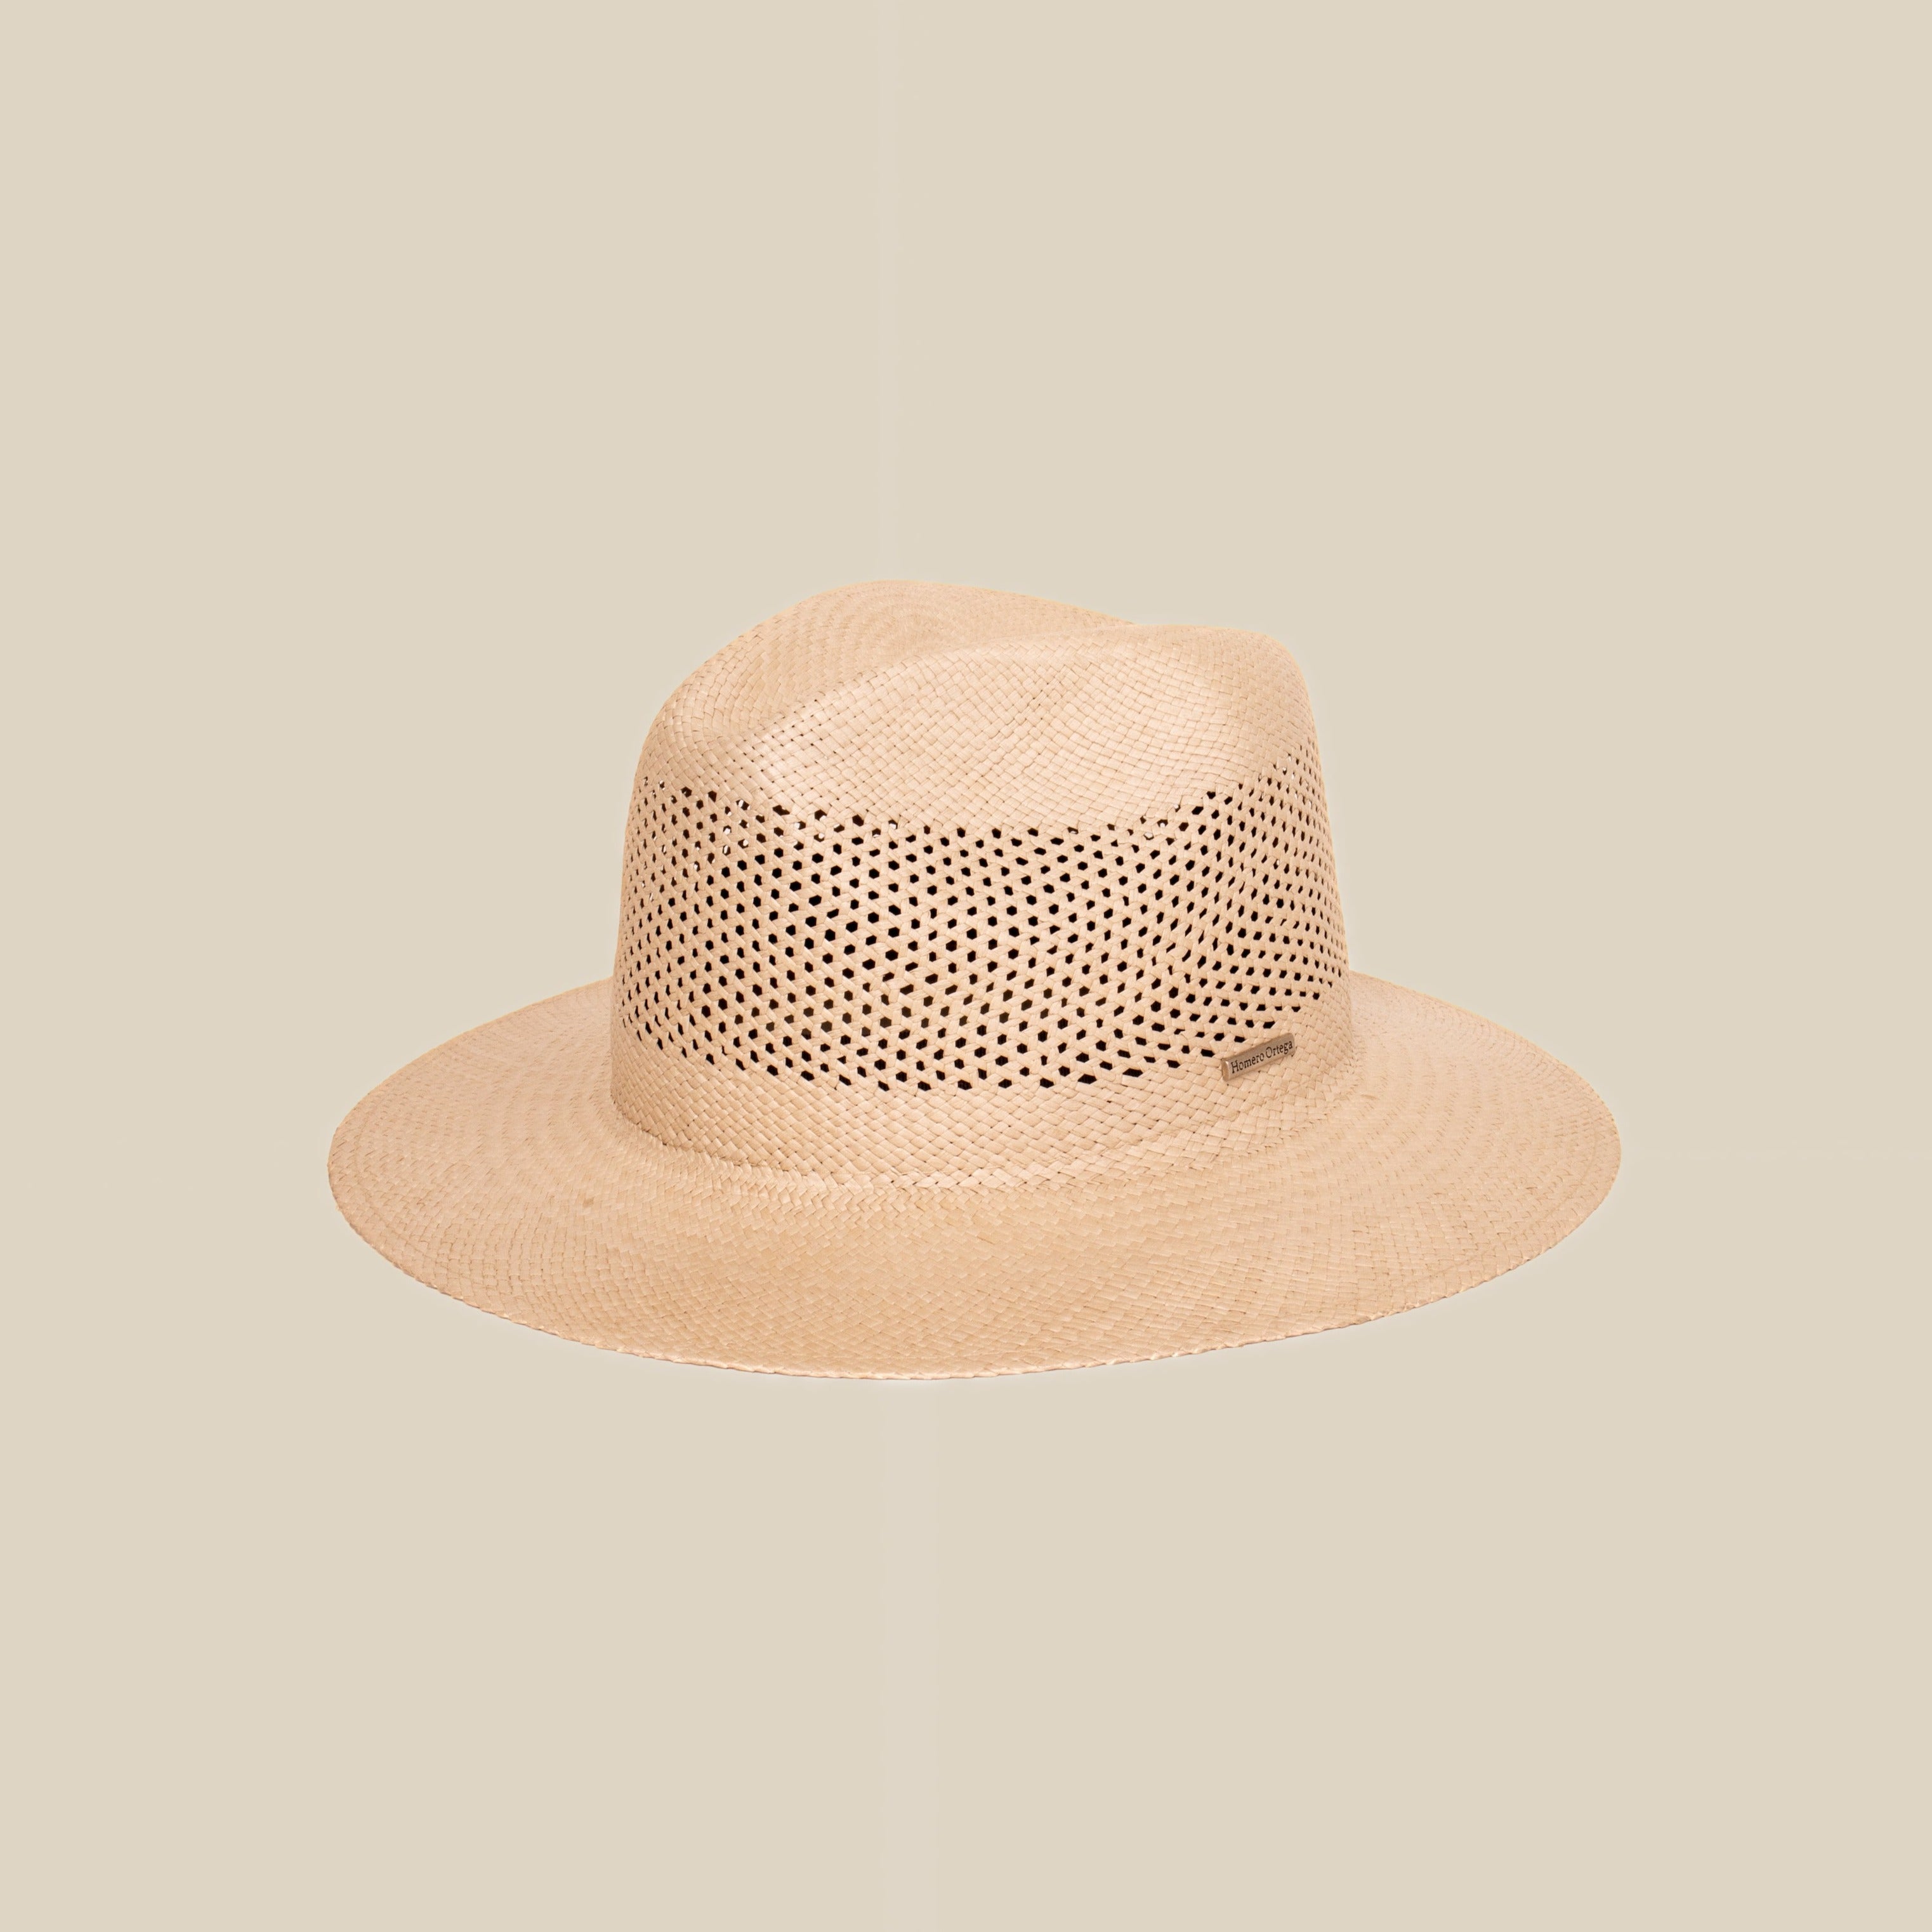 natural straw hat for summer